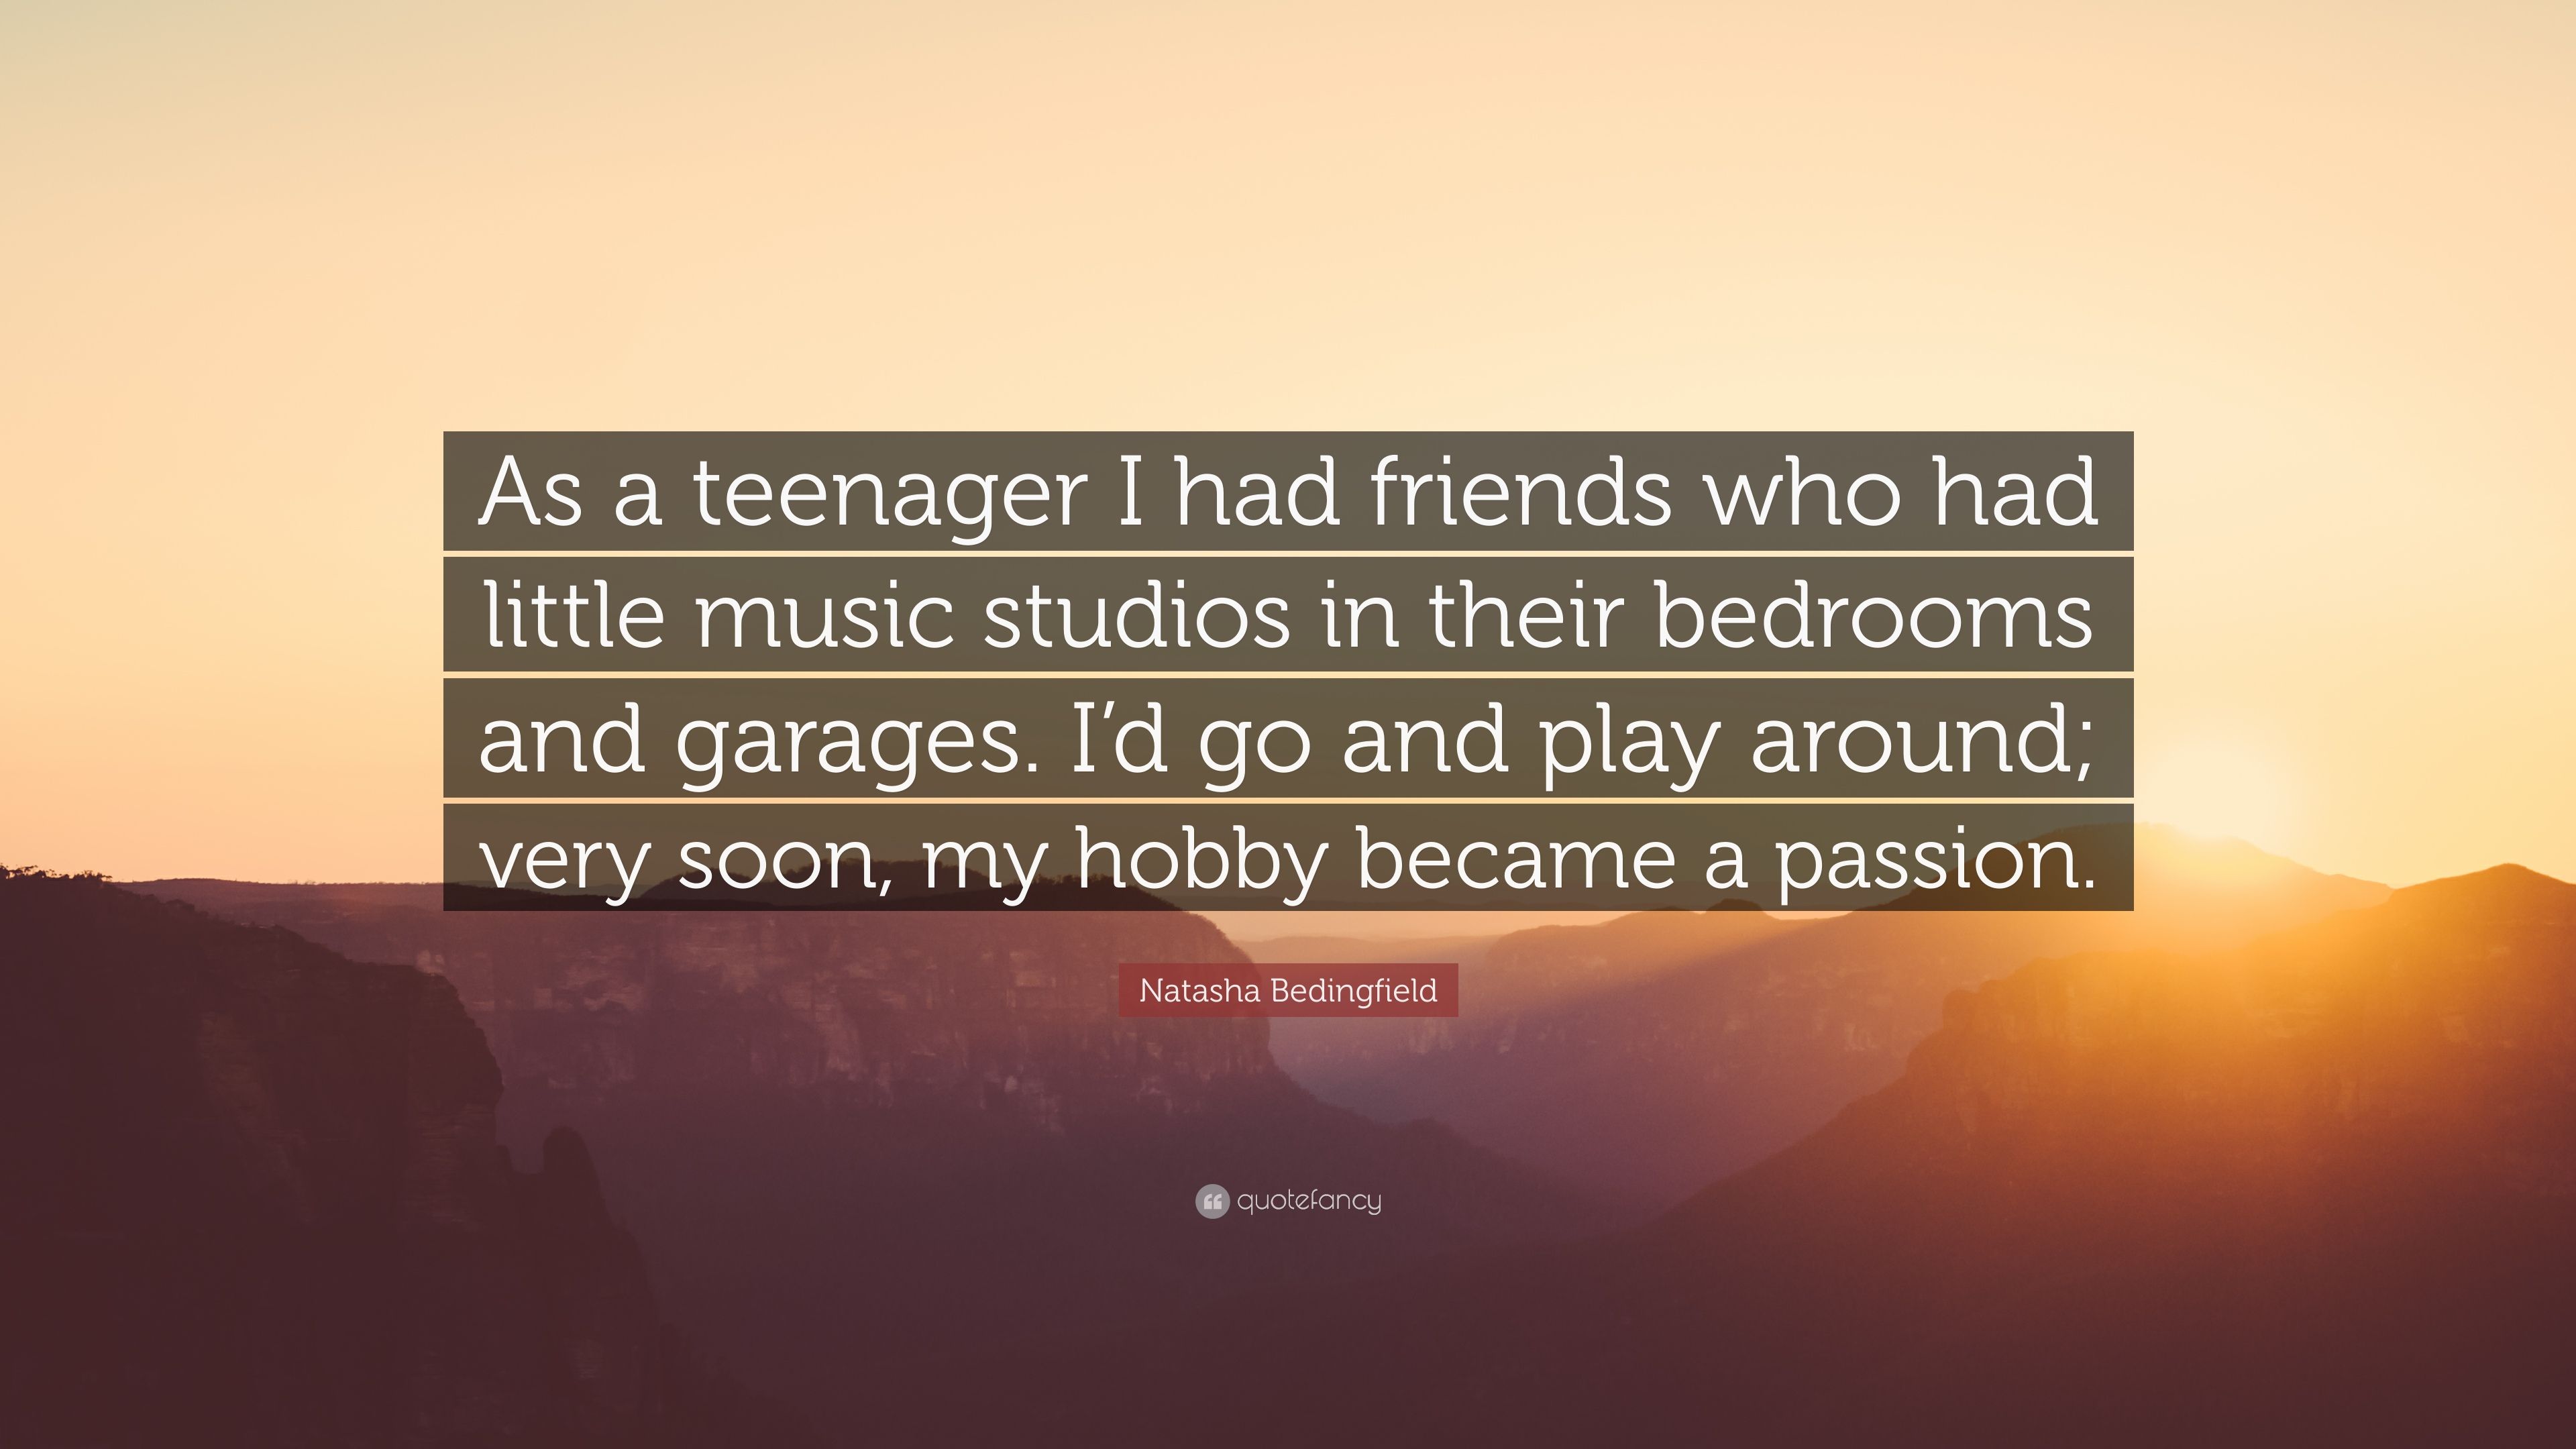 Natasha Bedingfield Quote: “As a teenager I had friends who had little music studios in their bedrooms and garages. I'd go and play around; very soo.” (7 wallpaper)